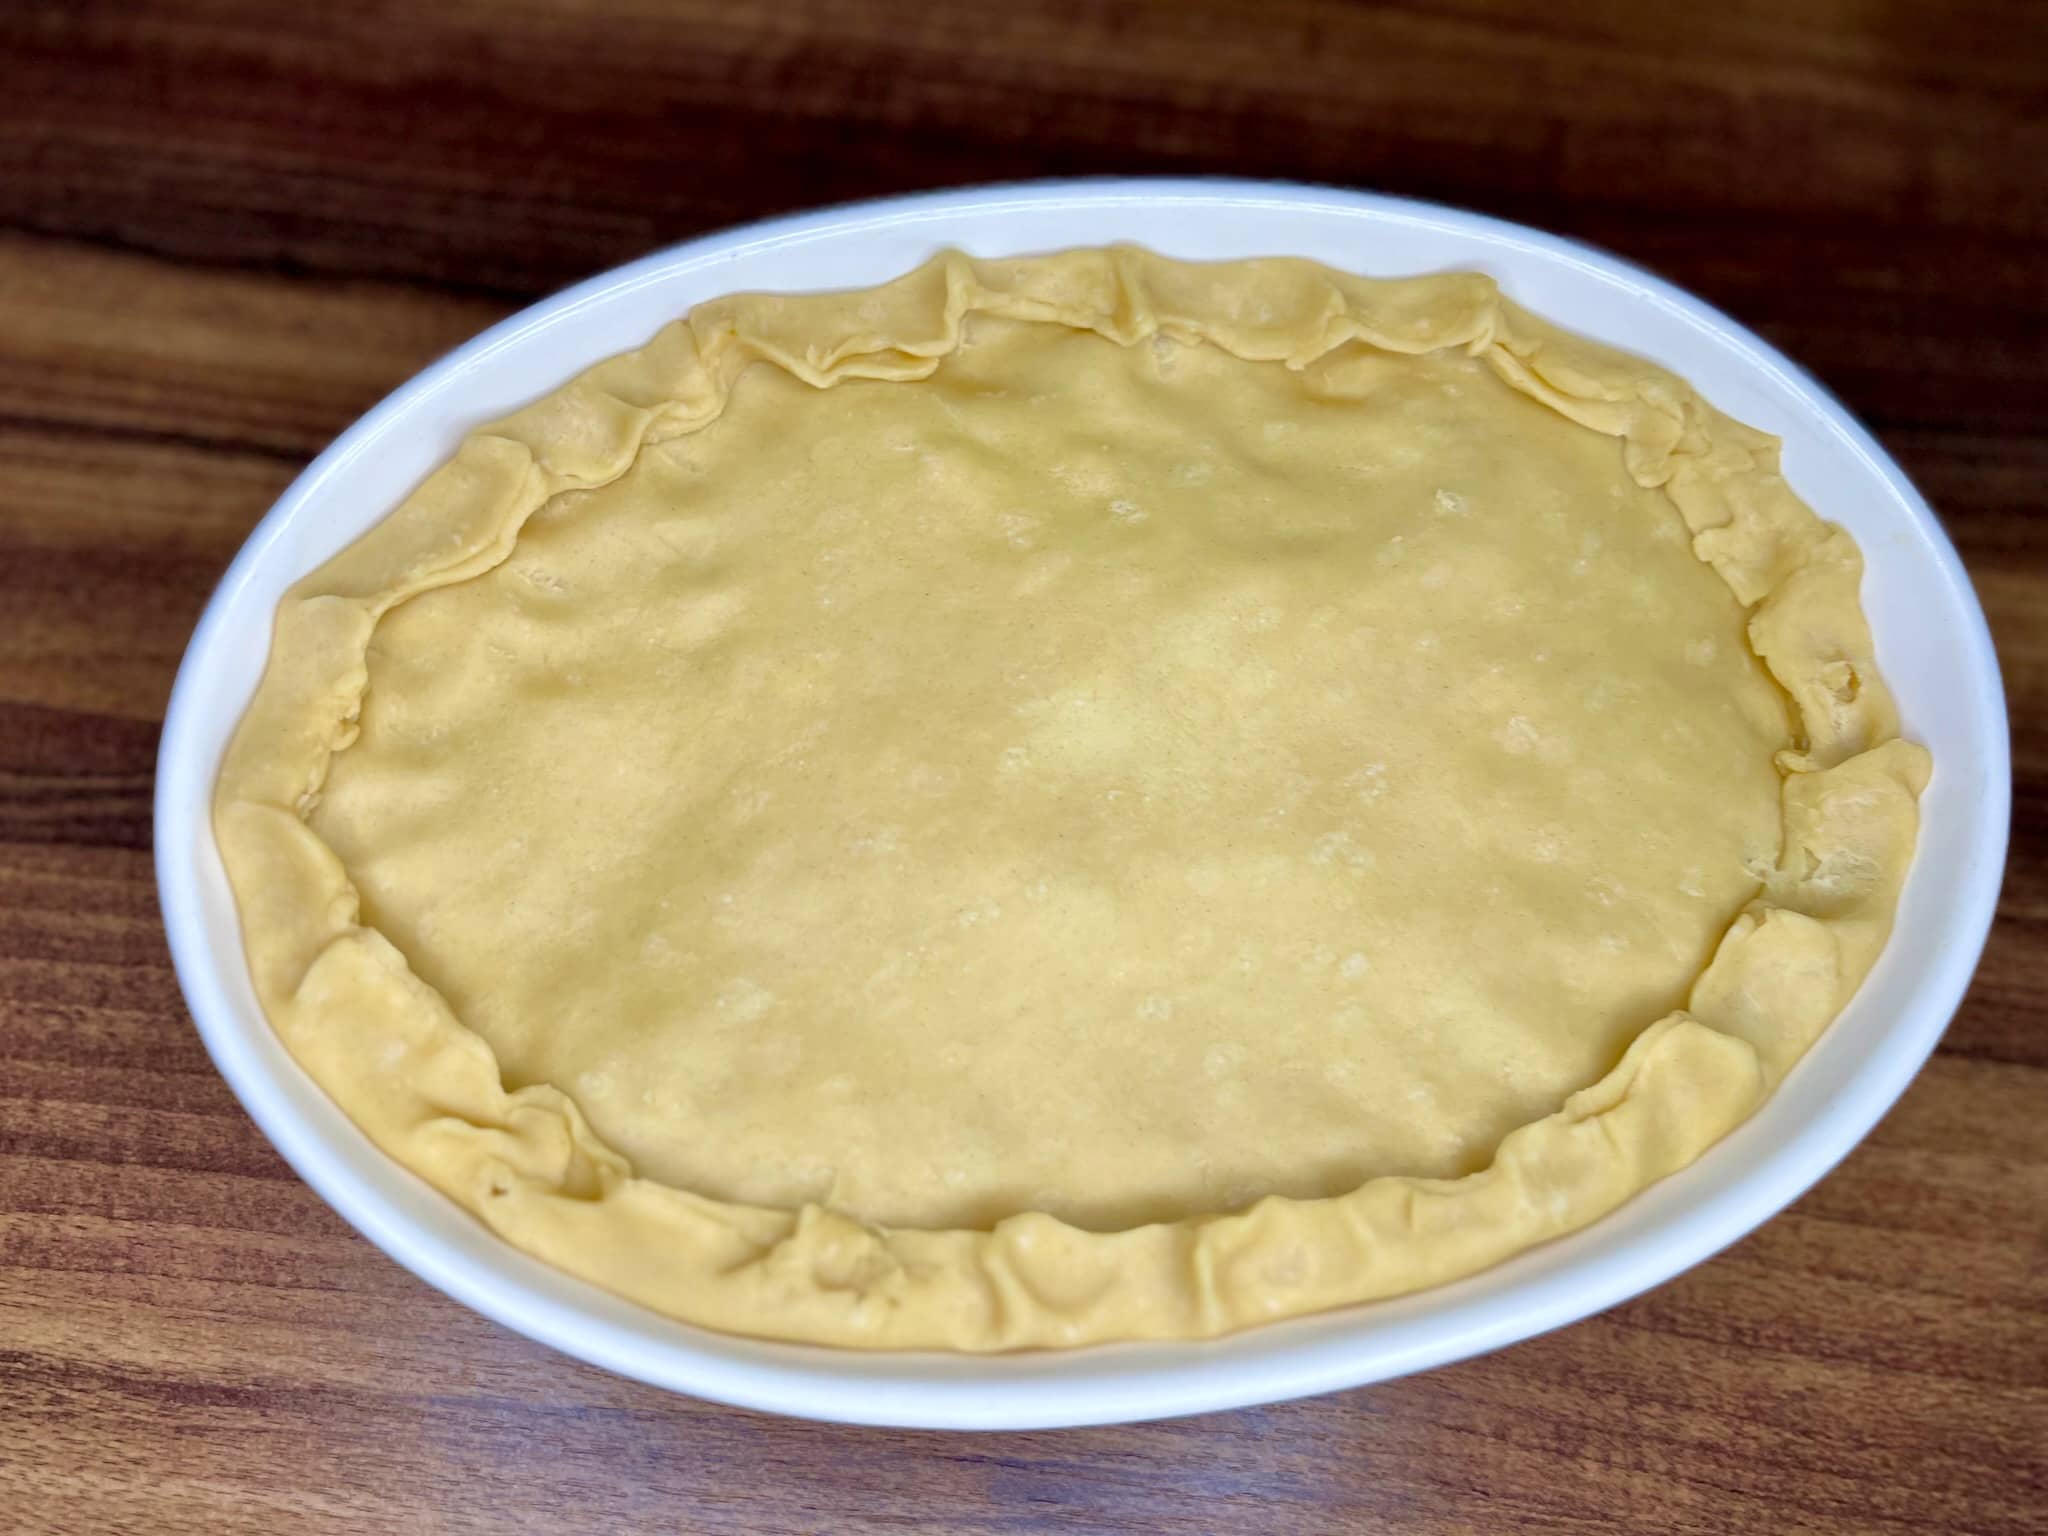 The top layer of a pie is nicely trimmed and closed on the edges